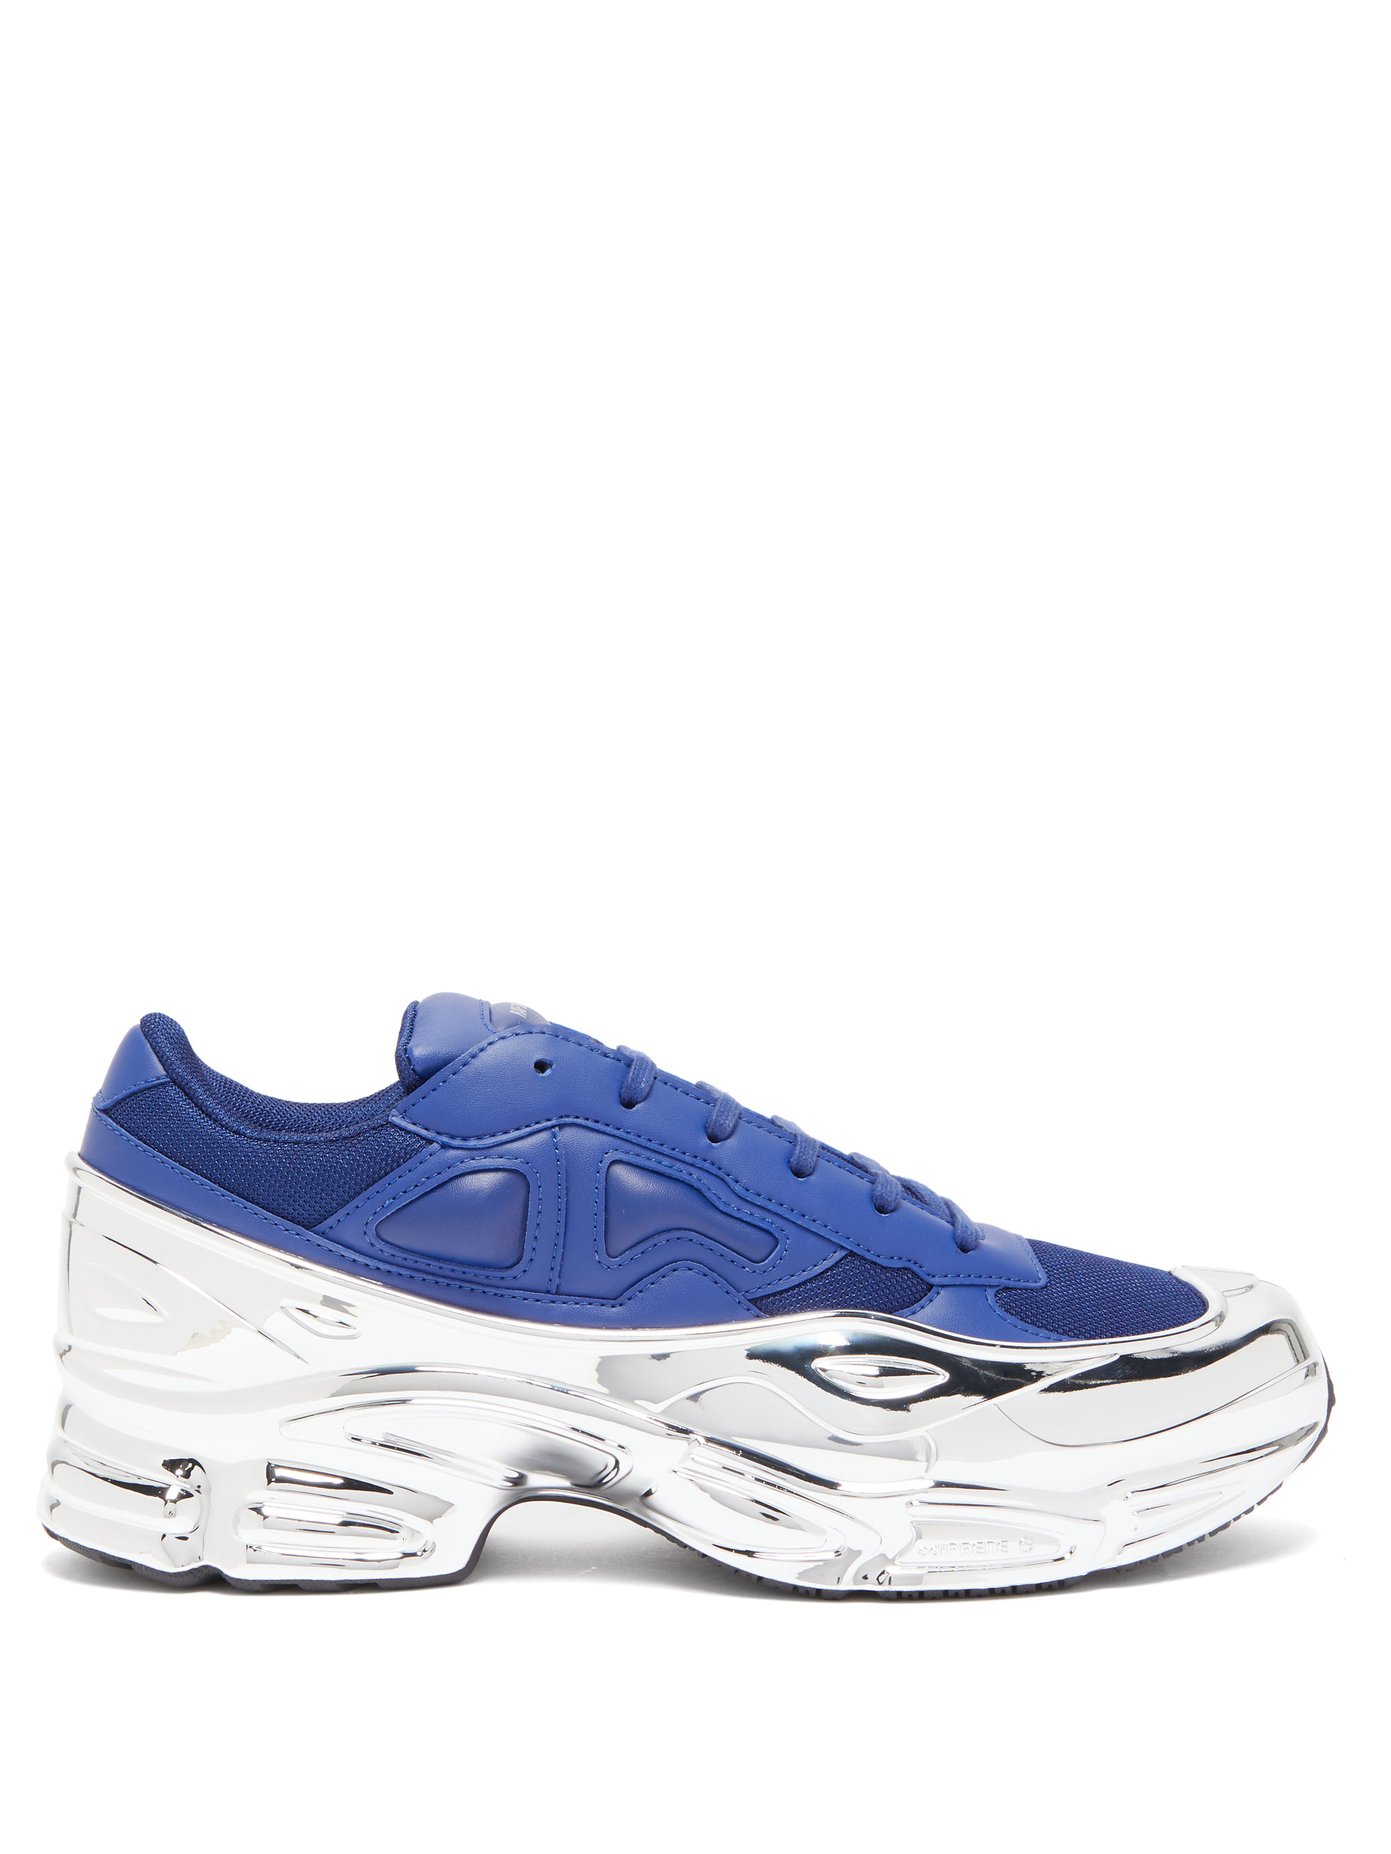 are raf simons true to size